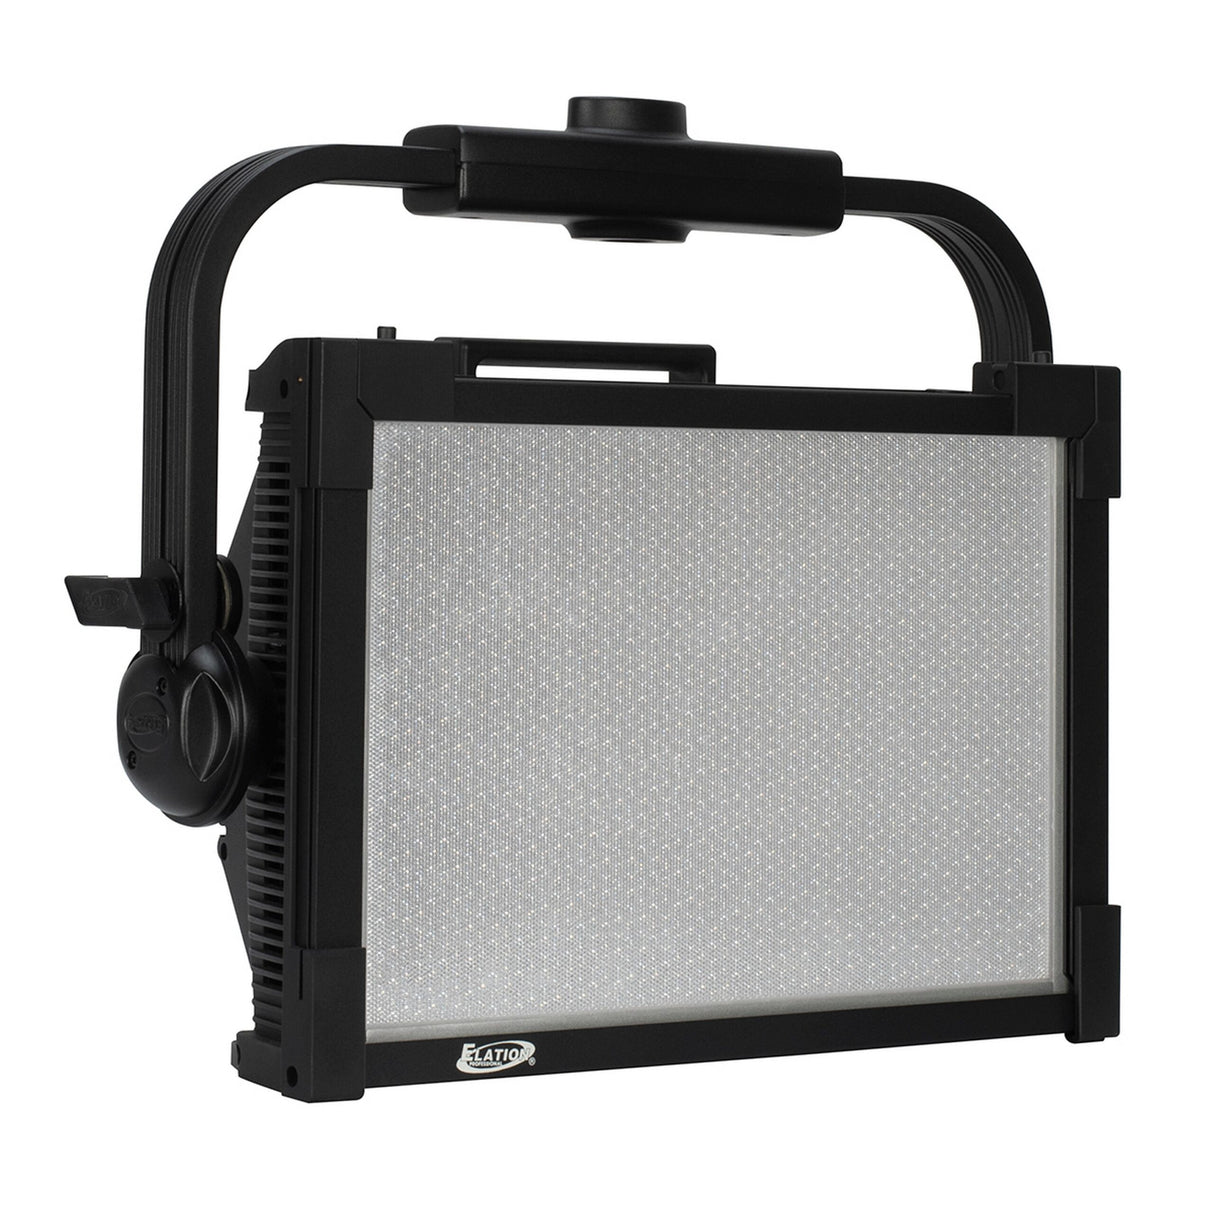 Elation KL Panel Intensifier Lens with 50 Degrees Beam/89 Degrees Field Angle